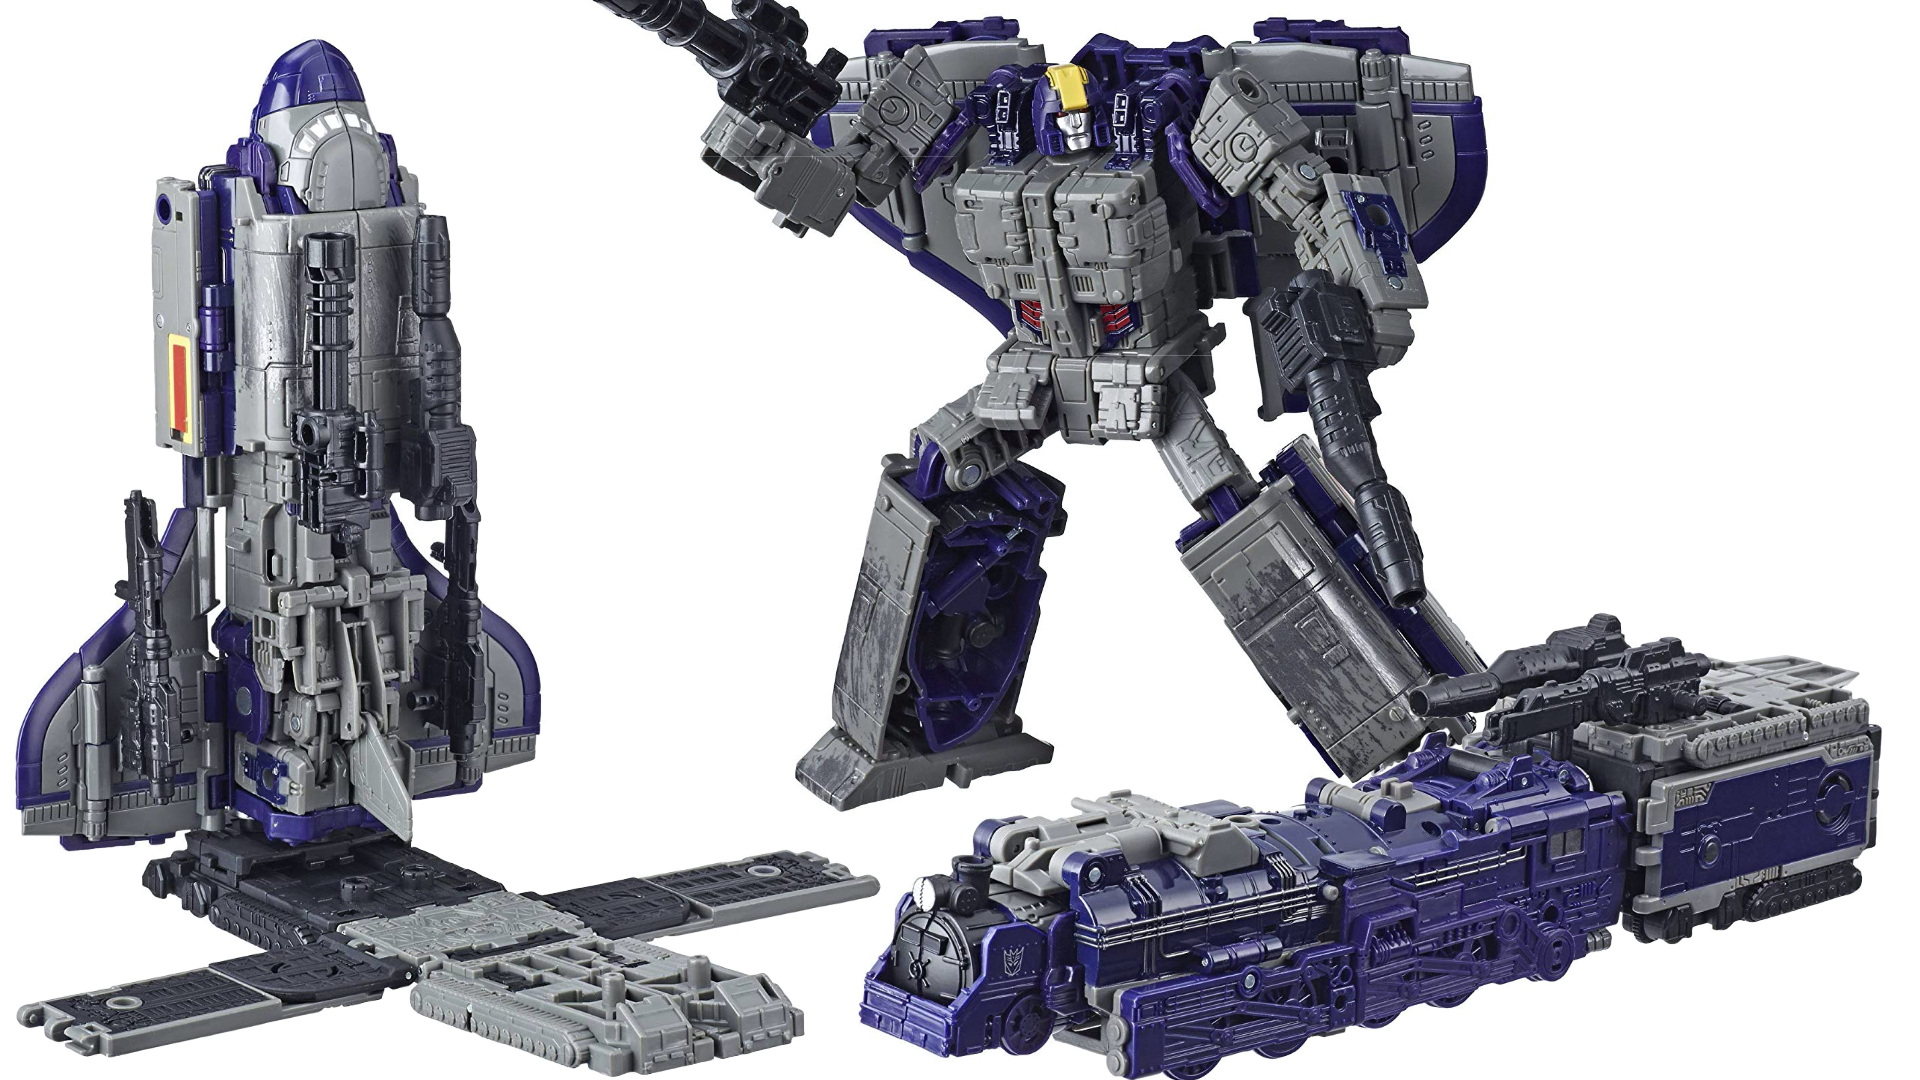 Astrotrain Details about   Hasbro Transformers Siege War For Cybertron Trilogy 